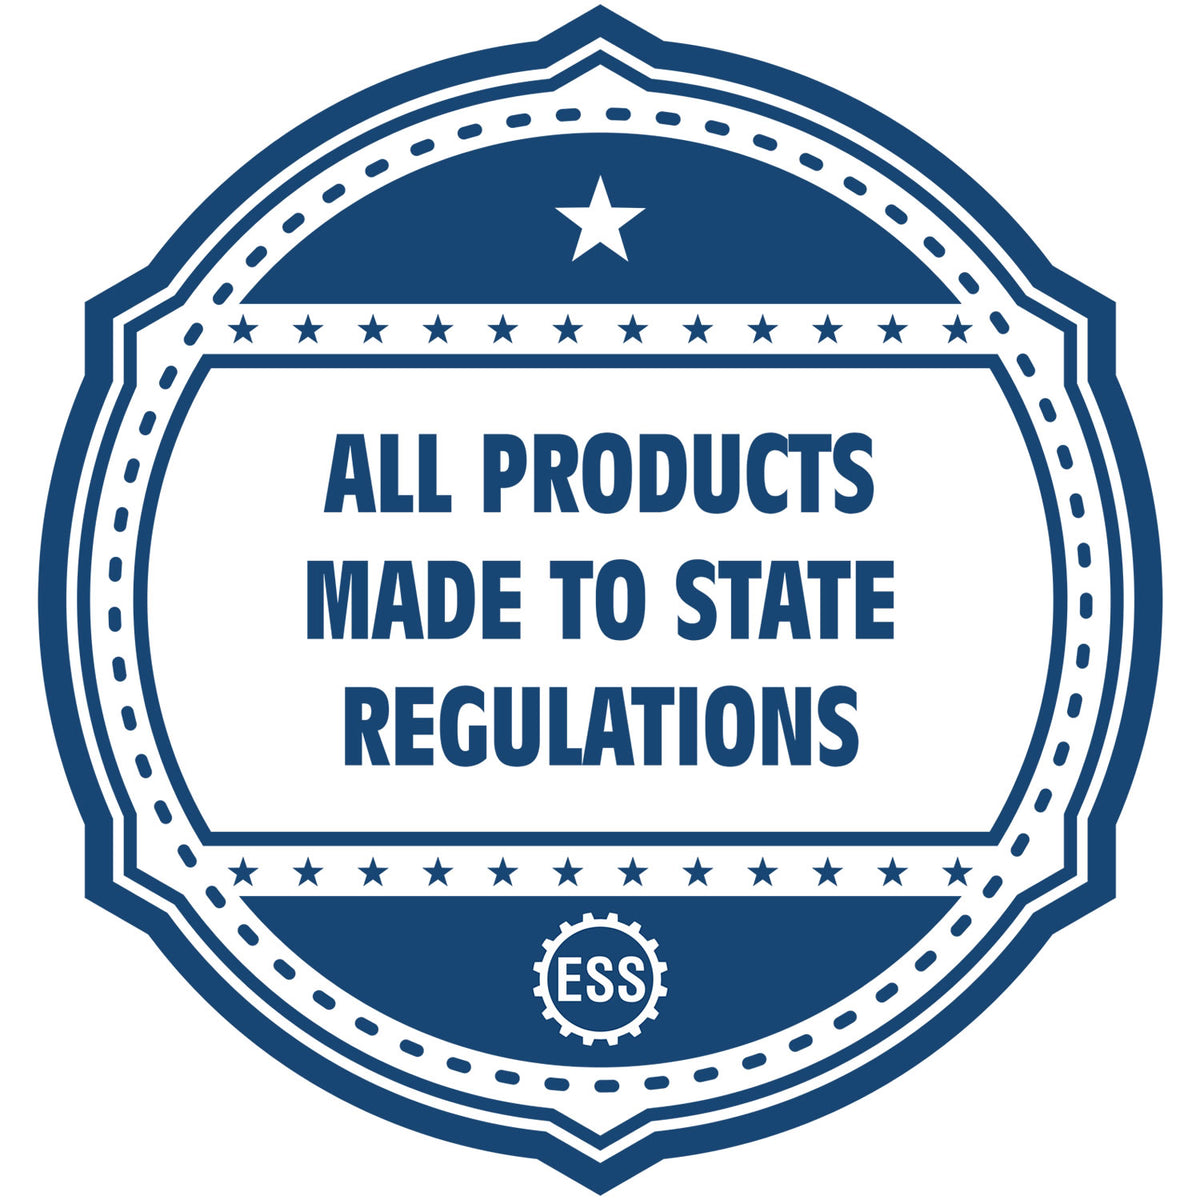 A blue icon or badge for the Gift Kentucky Engineer Seal showing that this product is made in compliance with state regulations.